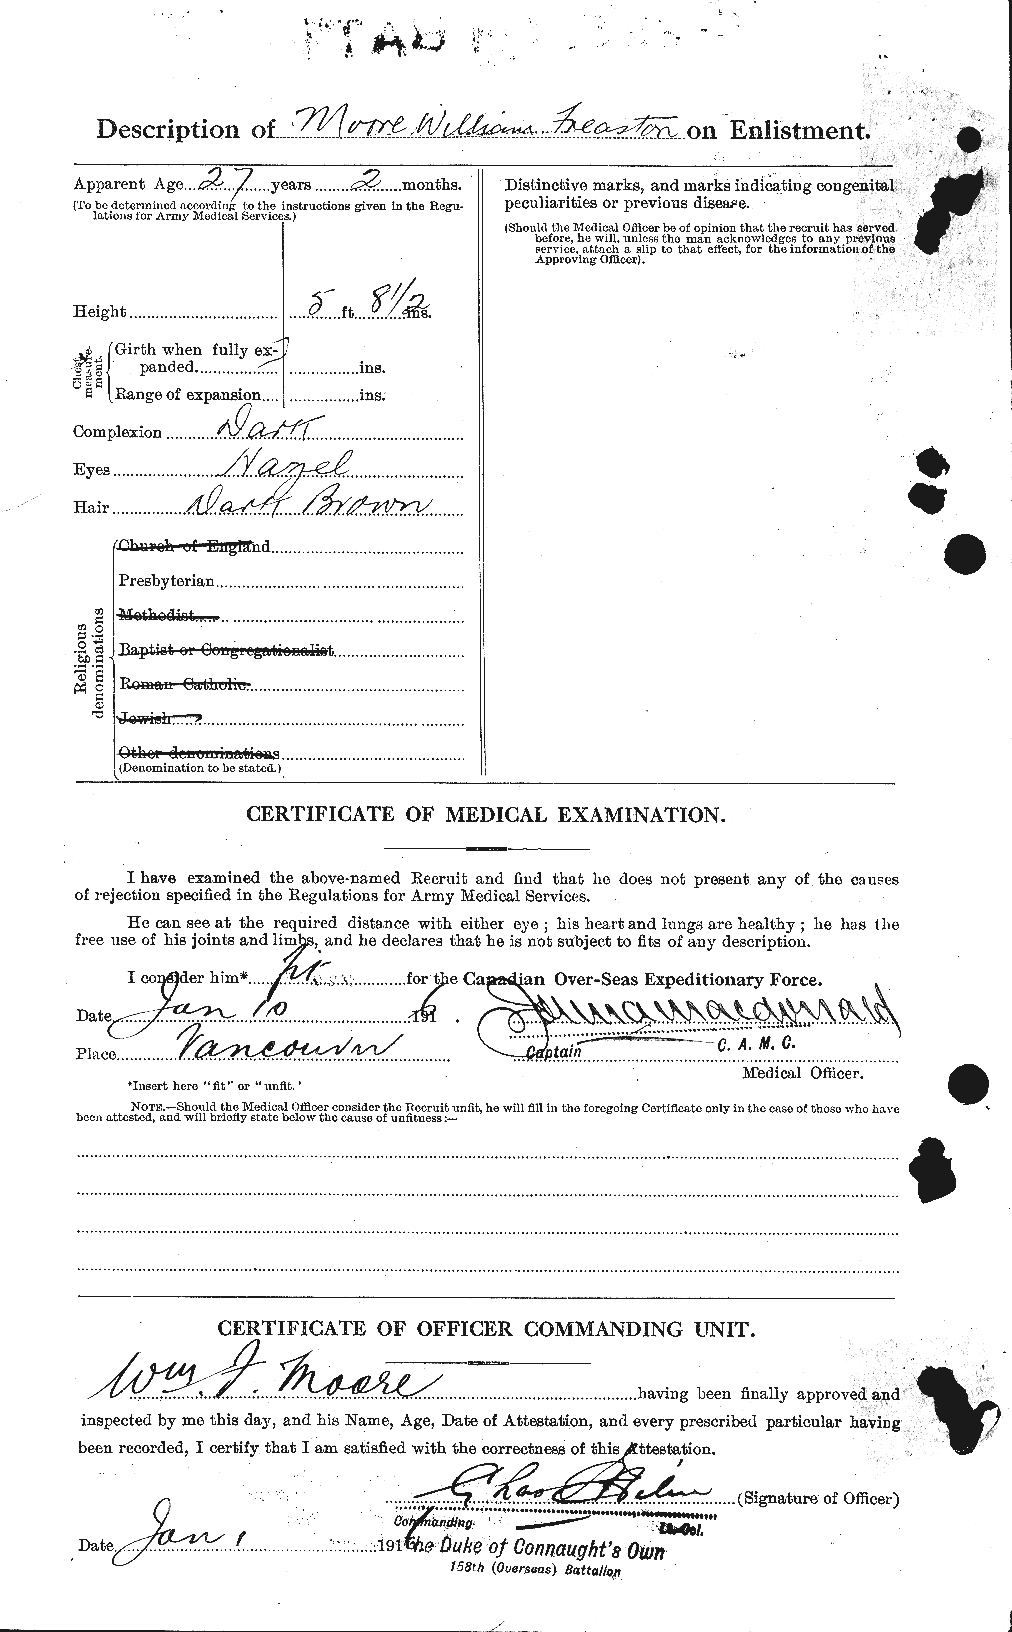 Personnel Records of the First World War - CEF 505806b